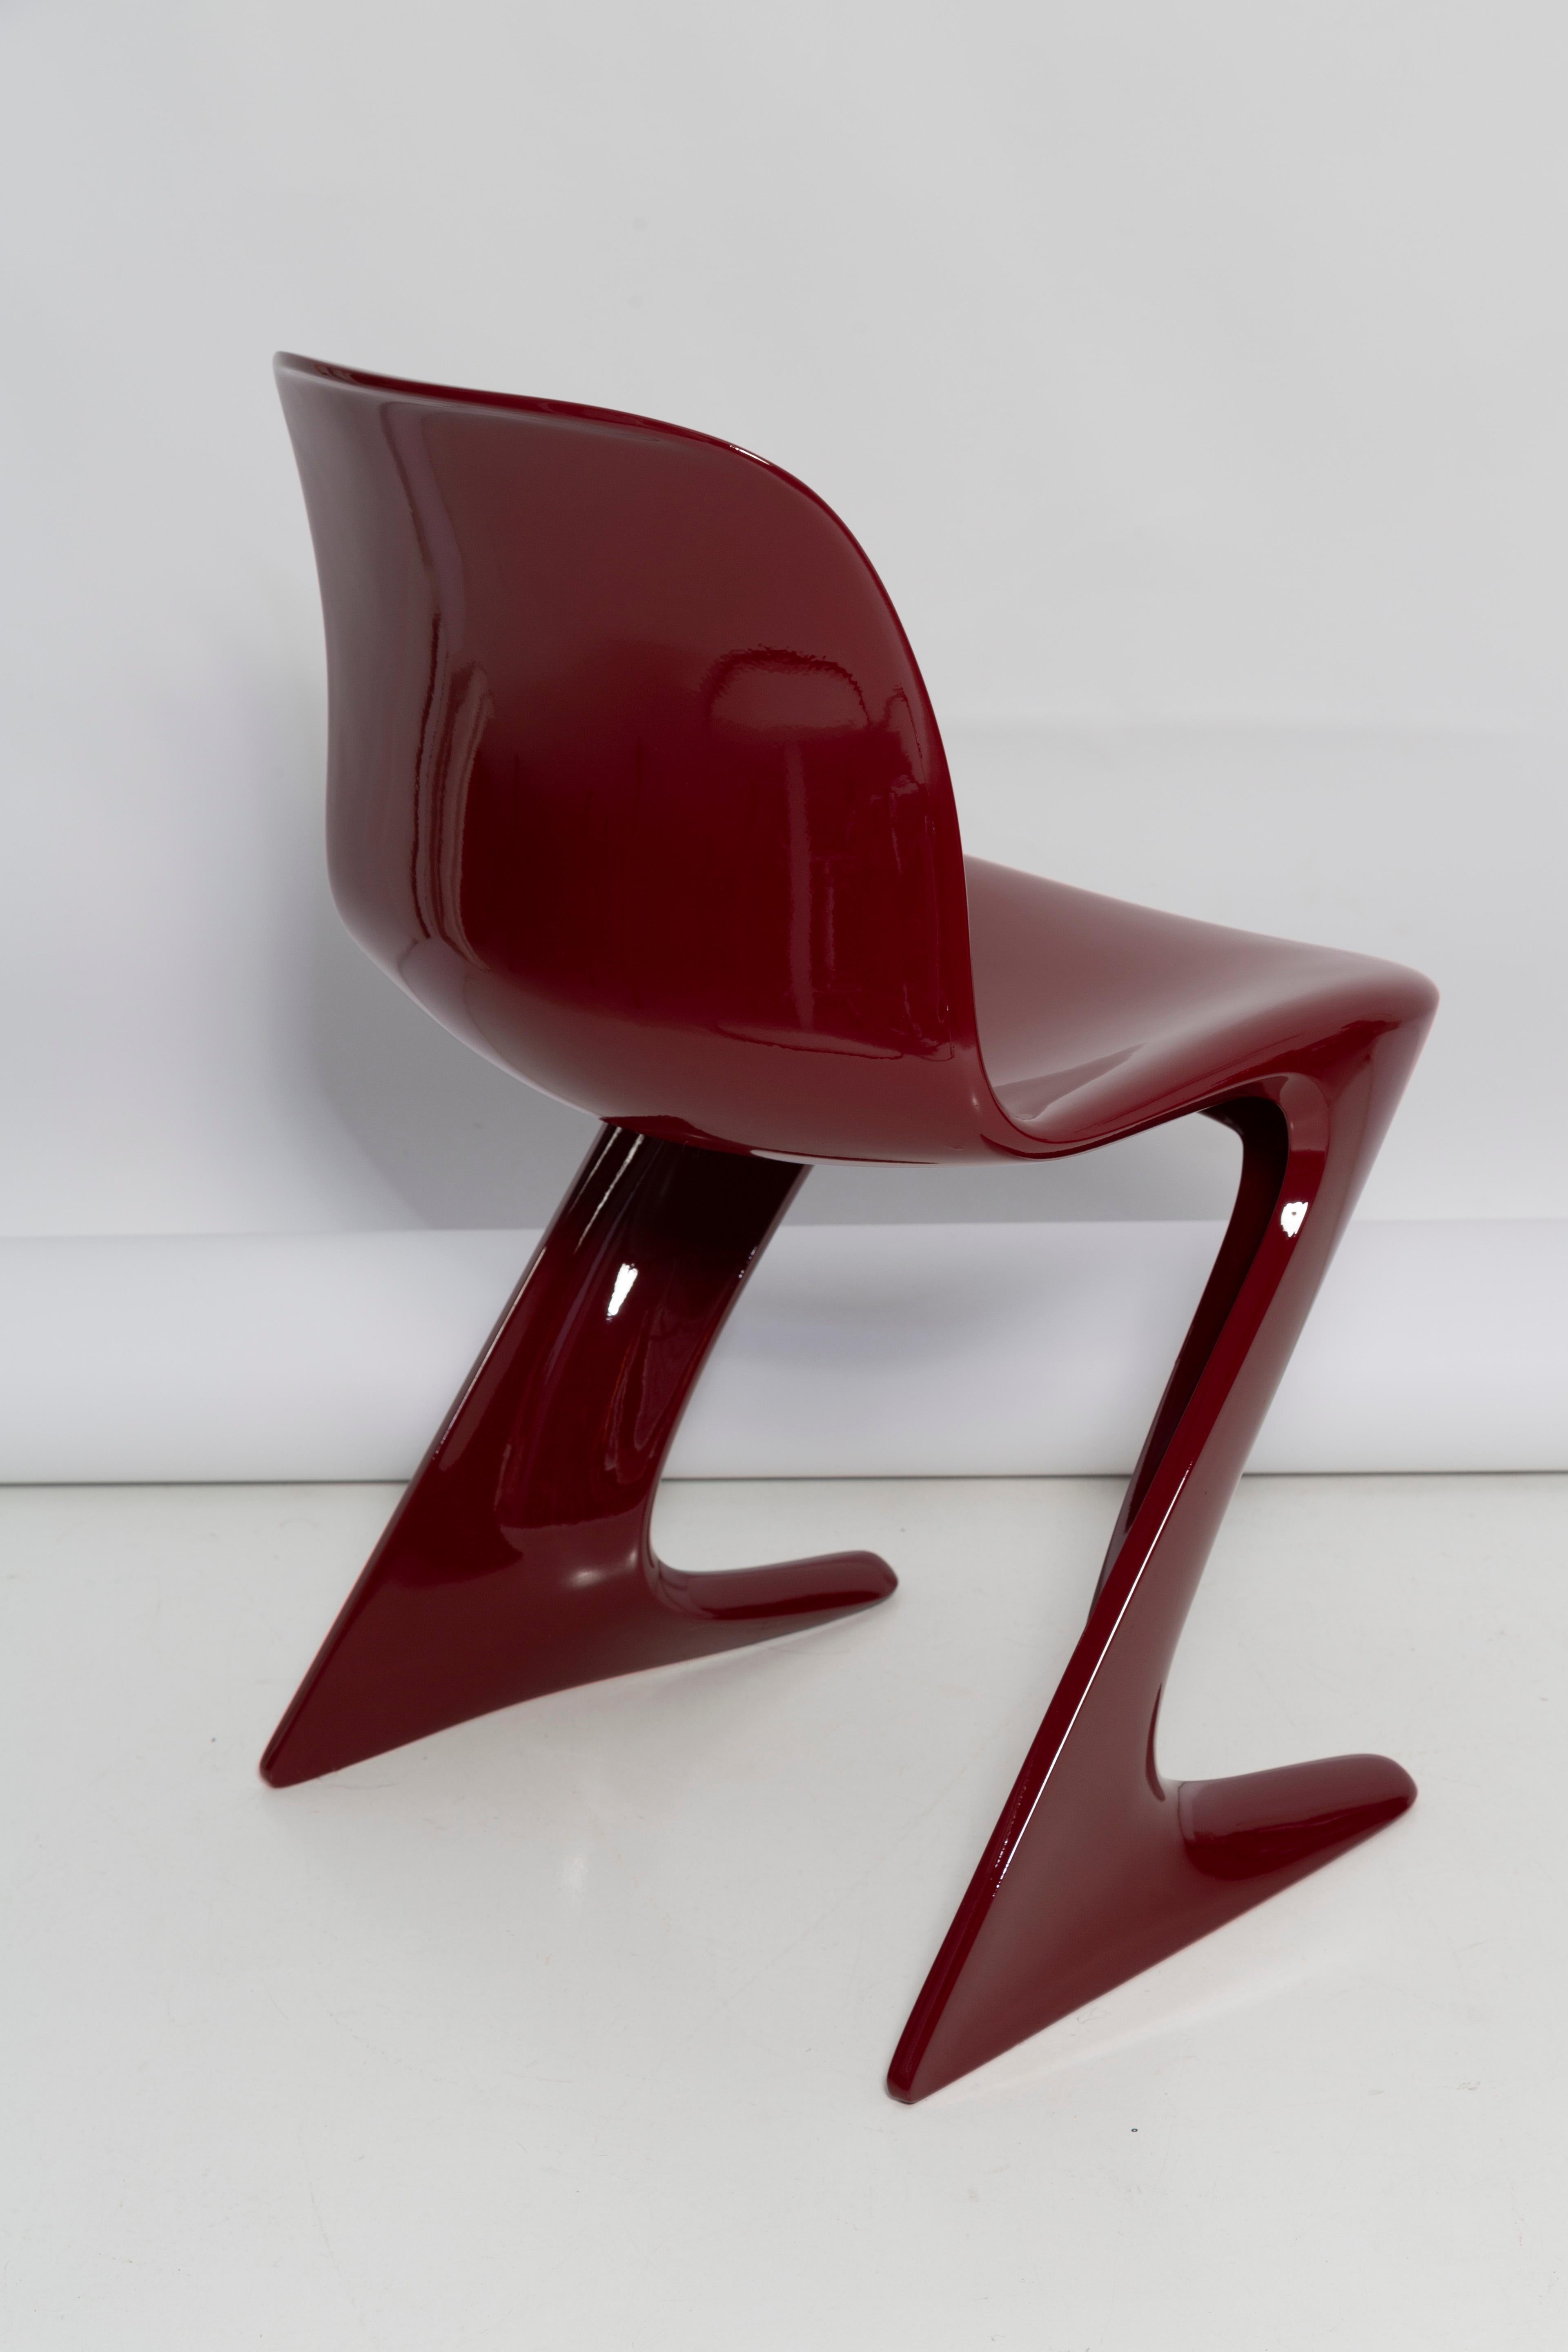 Set of Three Red Wine Kangaroo Chairs Designed by Ernst Moeckl, Germany, 1968 For Sale 3